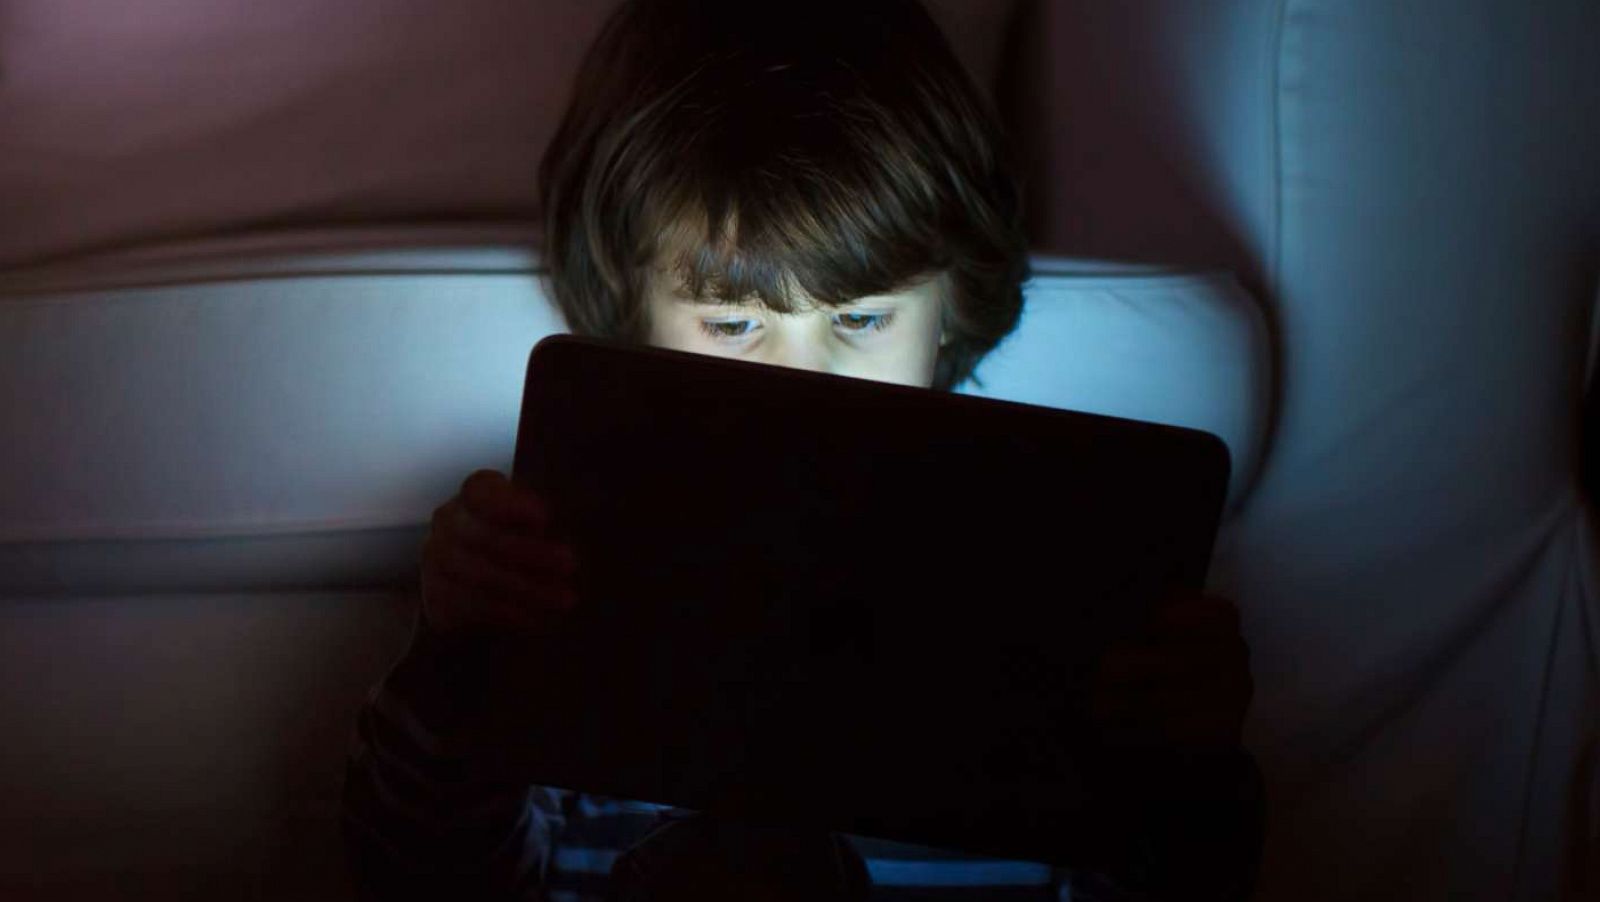 PHOTO: An undated stock photo shows a child suing am iPad.